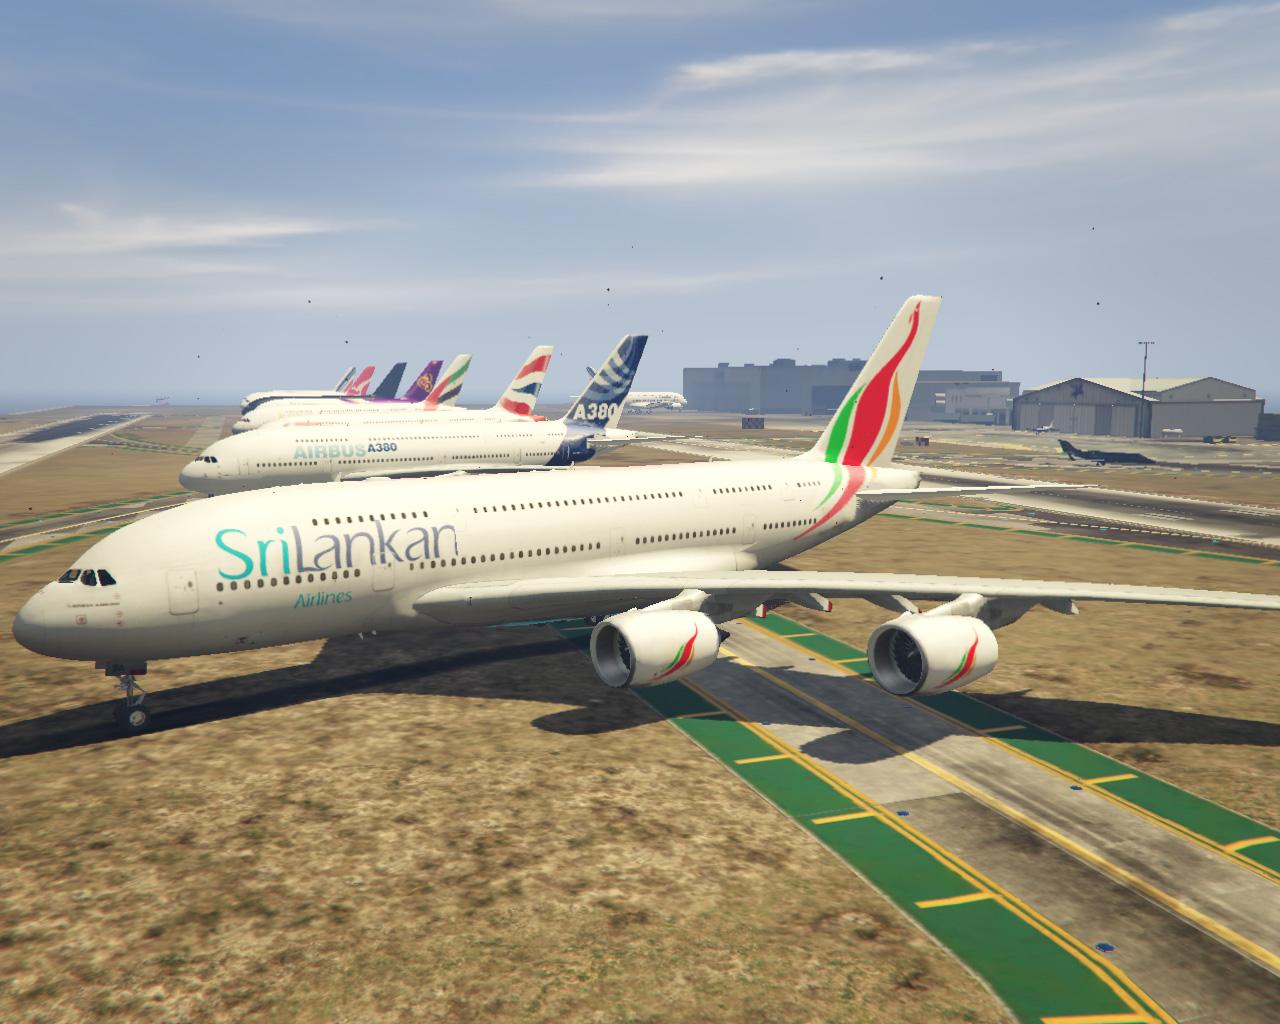 Sri Lankan Airlines Livery For A380 800